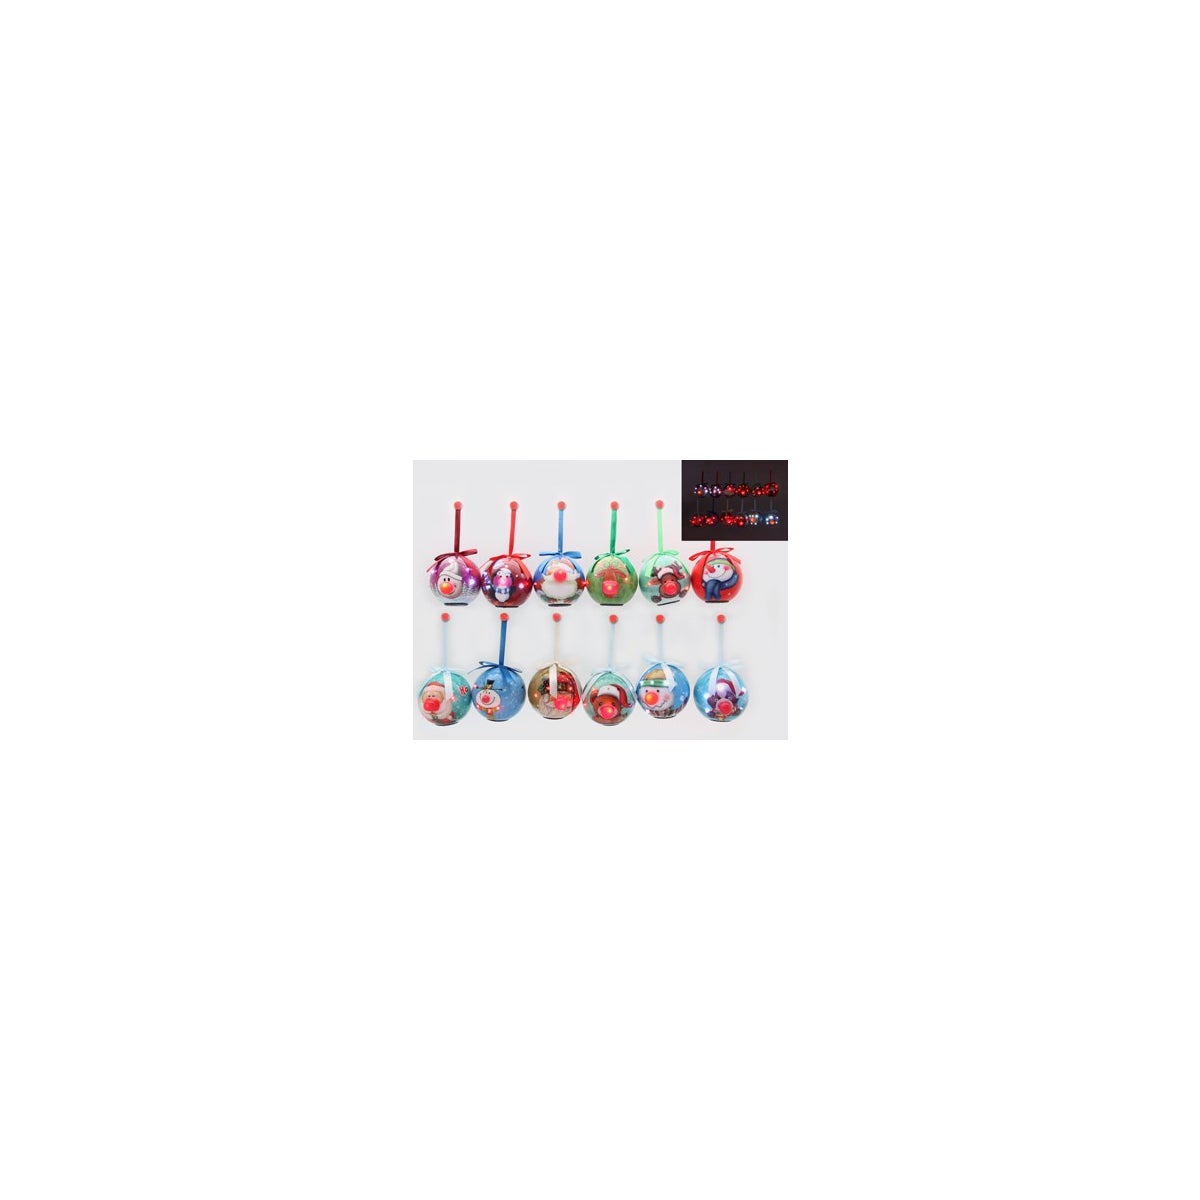 Blinking Ornament With LED Lights, 12 Ast